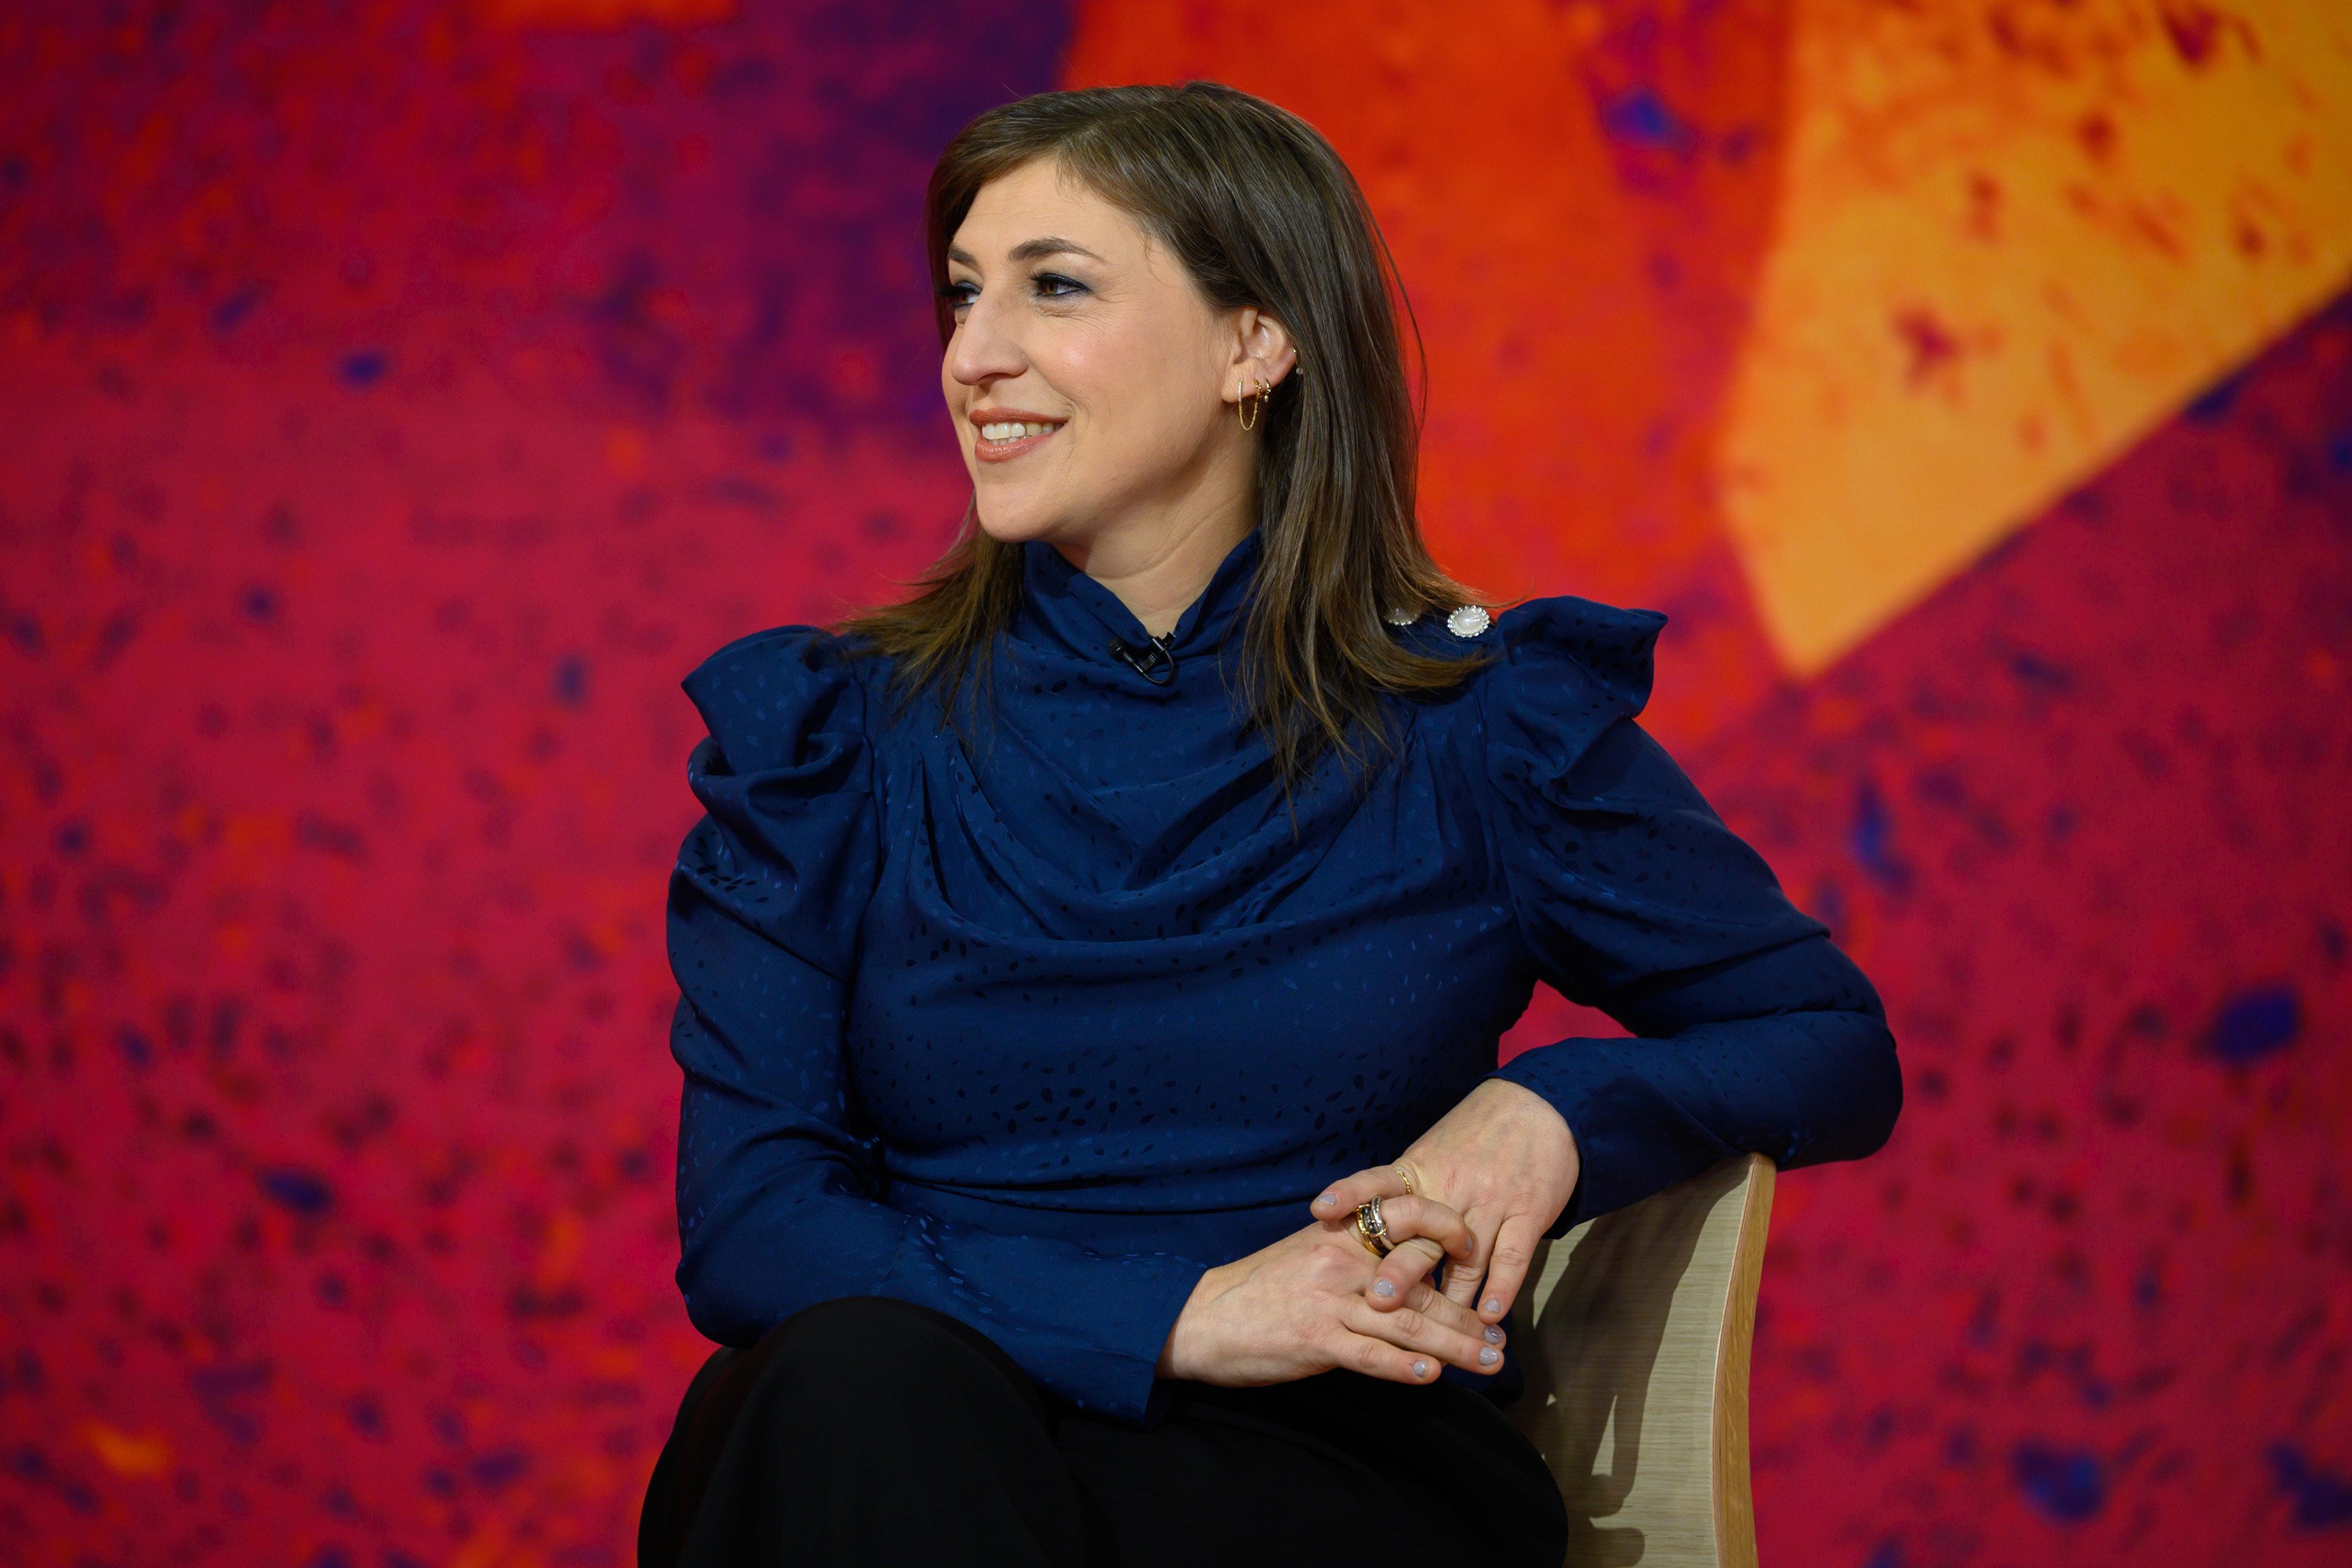 Mayim Bialik Wrote Her Film ‘As They Made Us’ With This ‘Big Bang Theory’ Alum in Mind for a Role